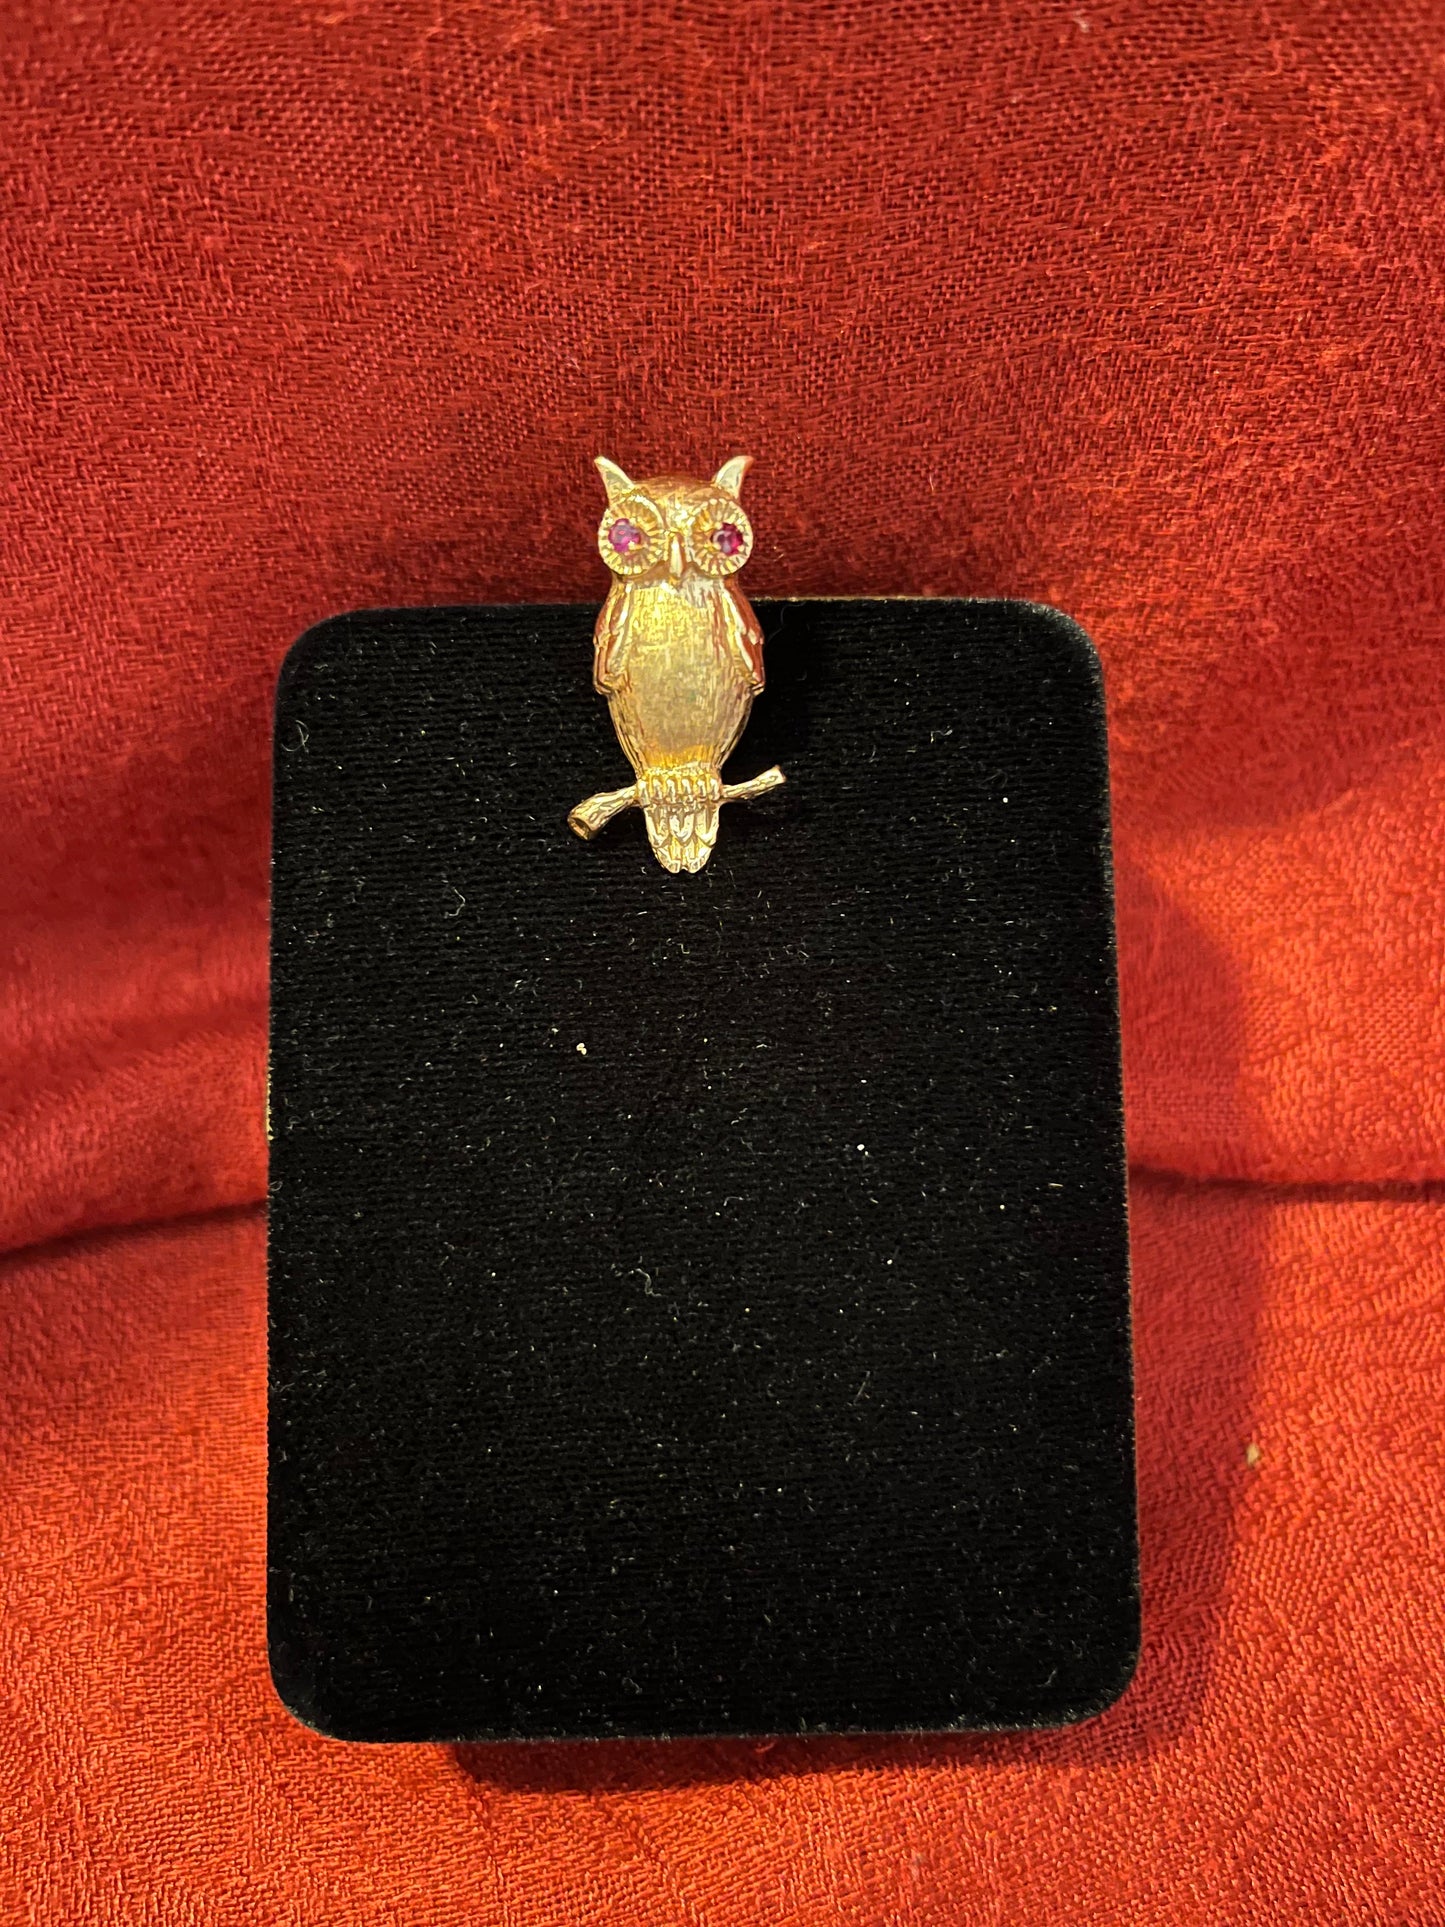 Vintage 14KT Gold and Ruby Owl Brooch